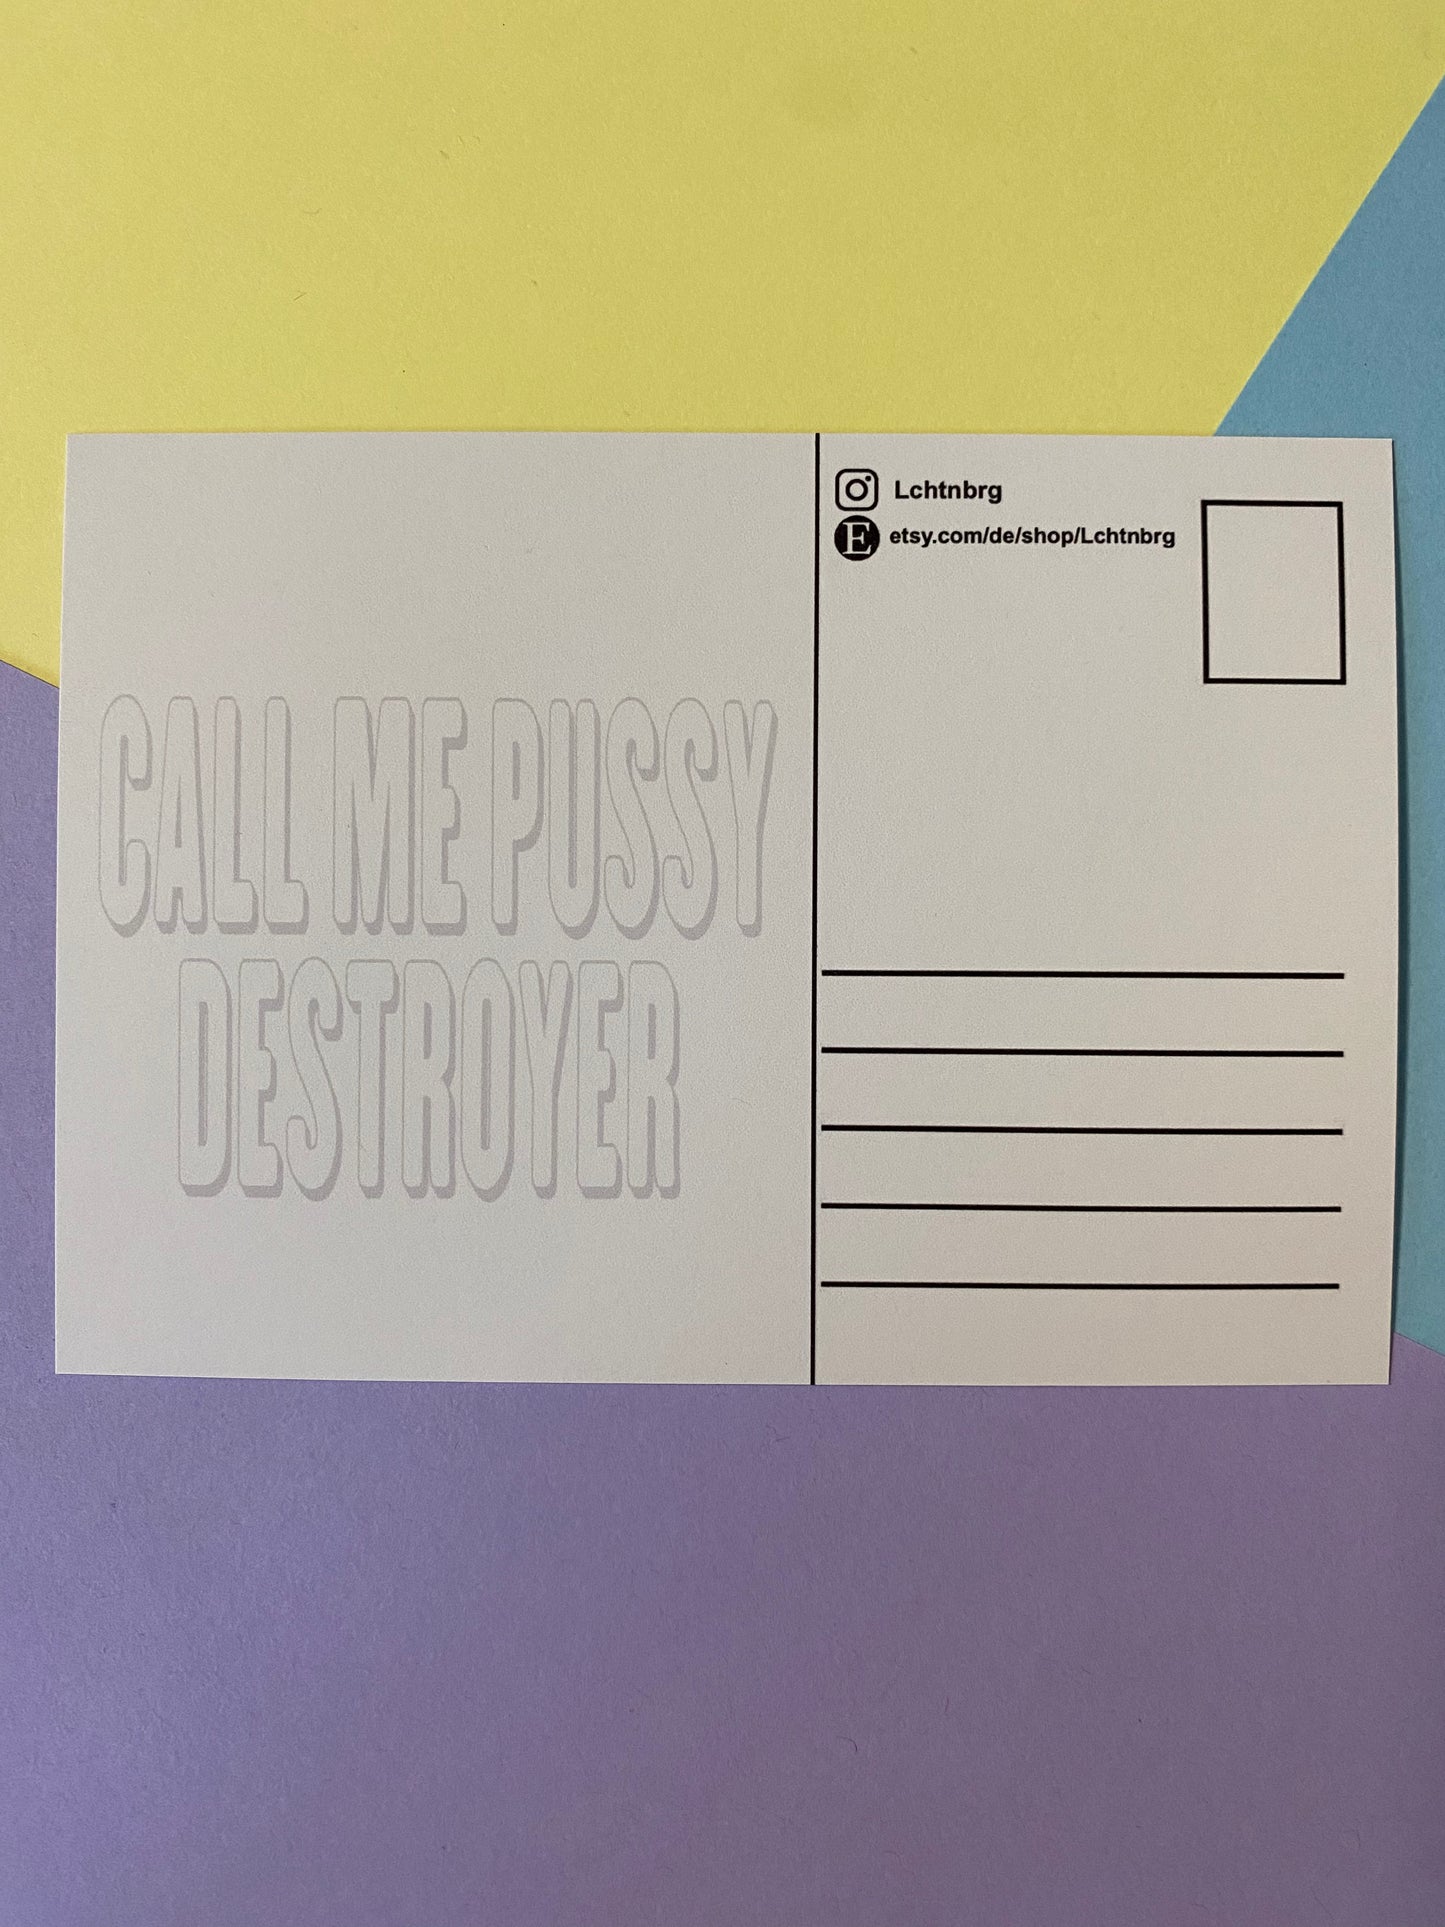 Postkarte „Call me pussy destroyer“